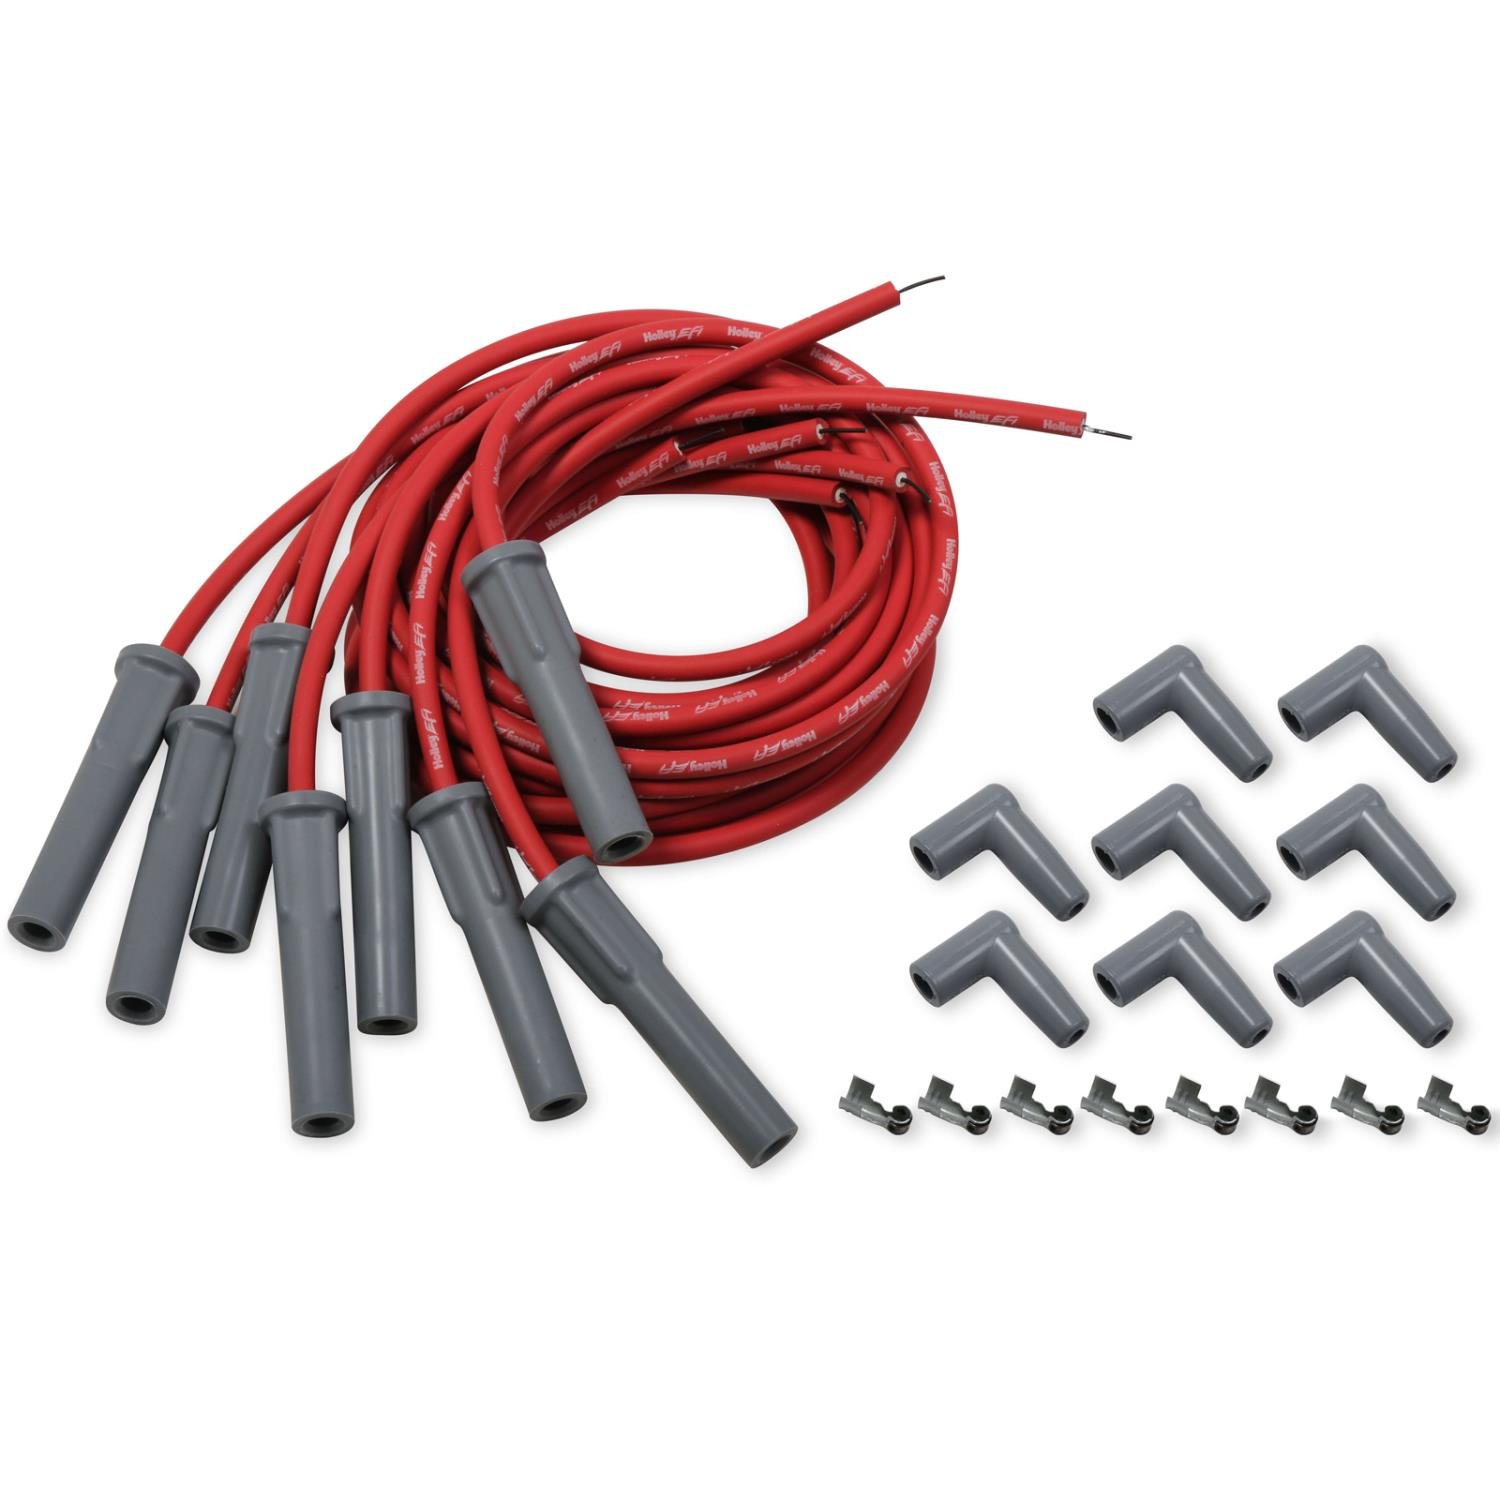 561-115 Holley EFI LS Spark Plug Wire Set - Cut to Fit - JEGS